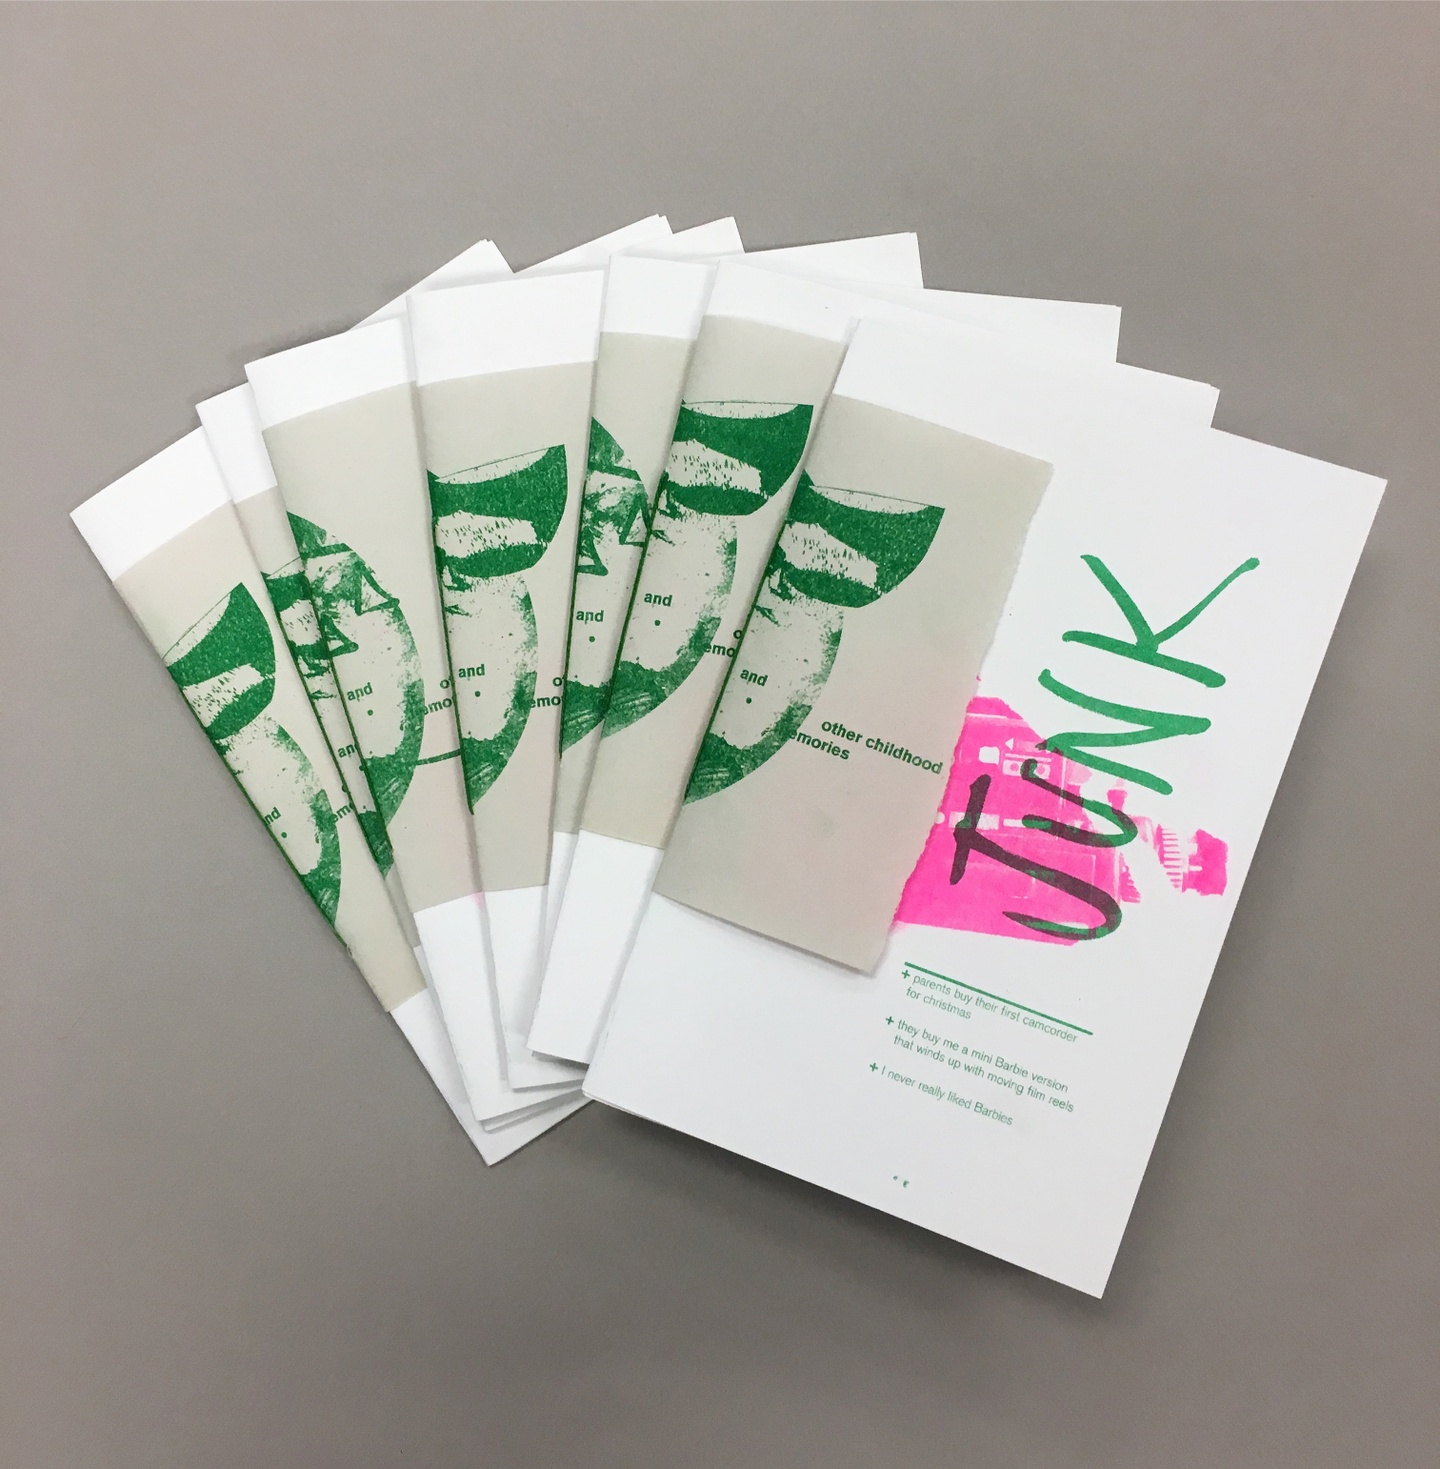 A group of several copies of the same zine. Each zine's spine is wrapped with a green-on-gray print depicting imagery and the words "and other childhood memories." The cover of the zine is white with pink imagery and green lettering. The word "JUNK" is big and handwritten. The following list appears below it in smaller text: "+ parents buy their first camcorder for christmas" "+ they buy me a mini Barbie version that winds up with moving film reels" "+ I never really liked Barbies"